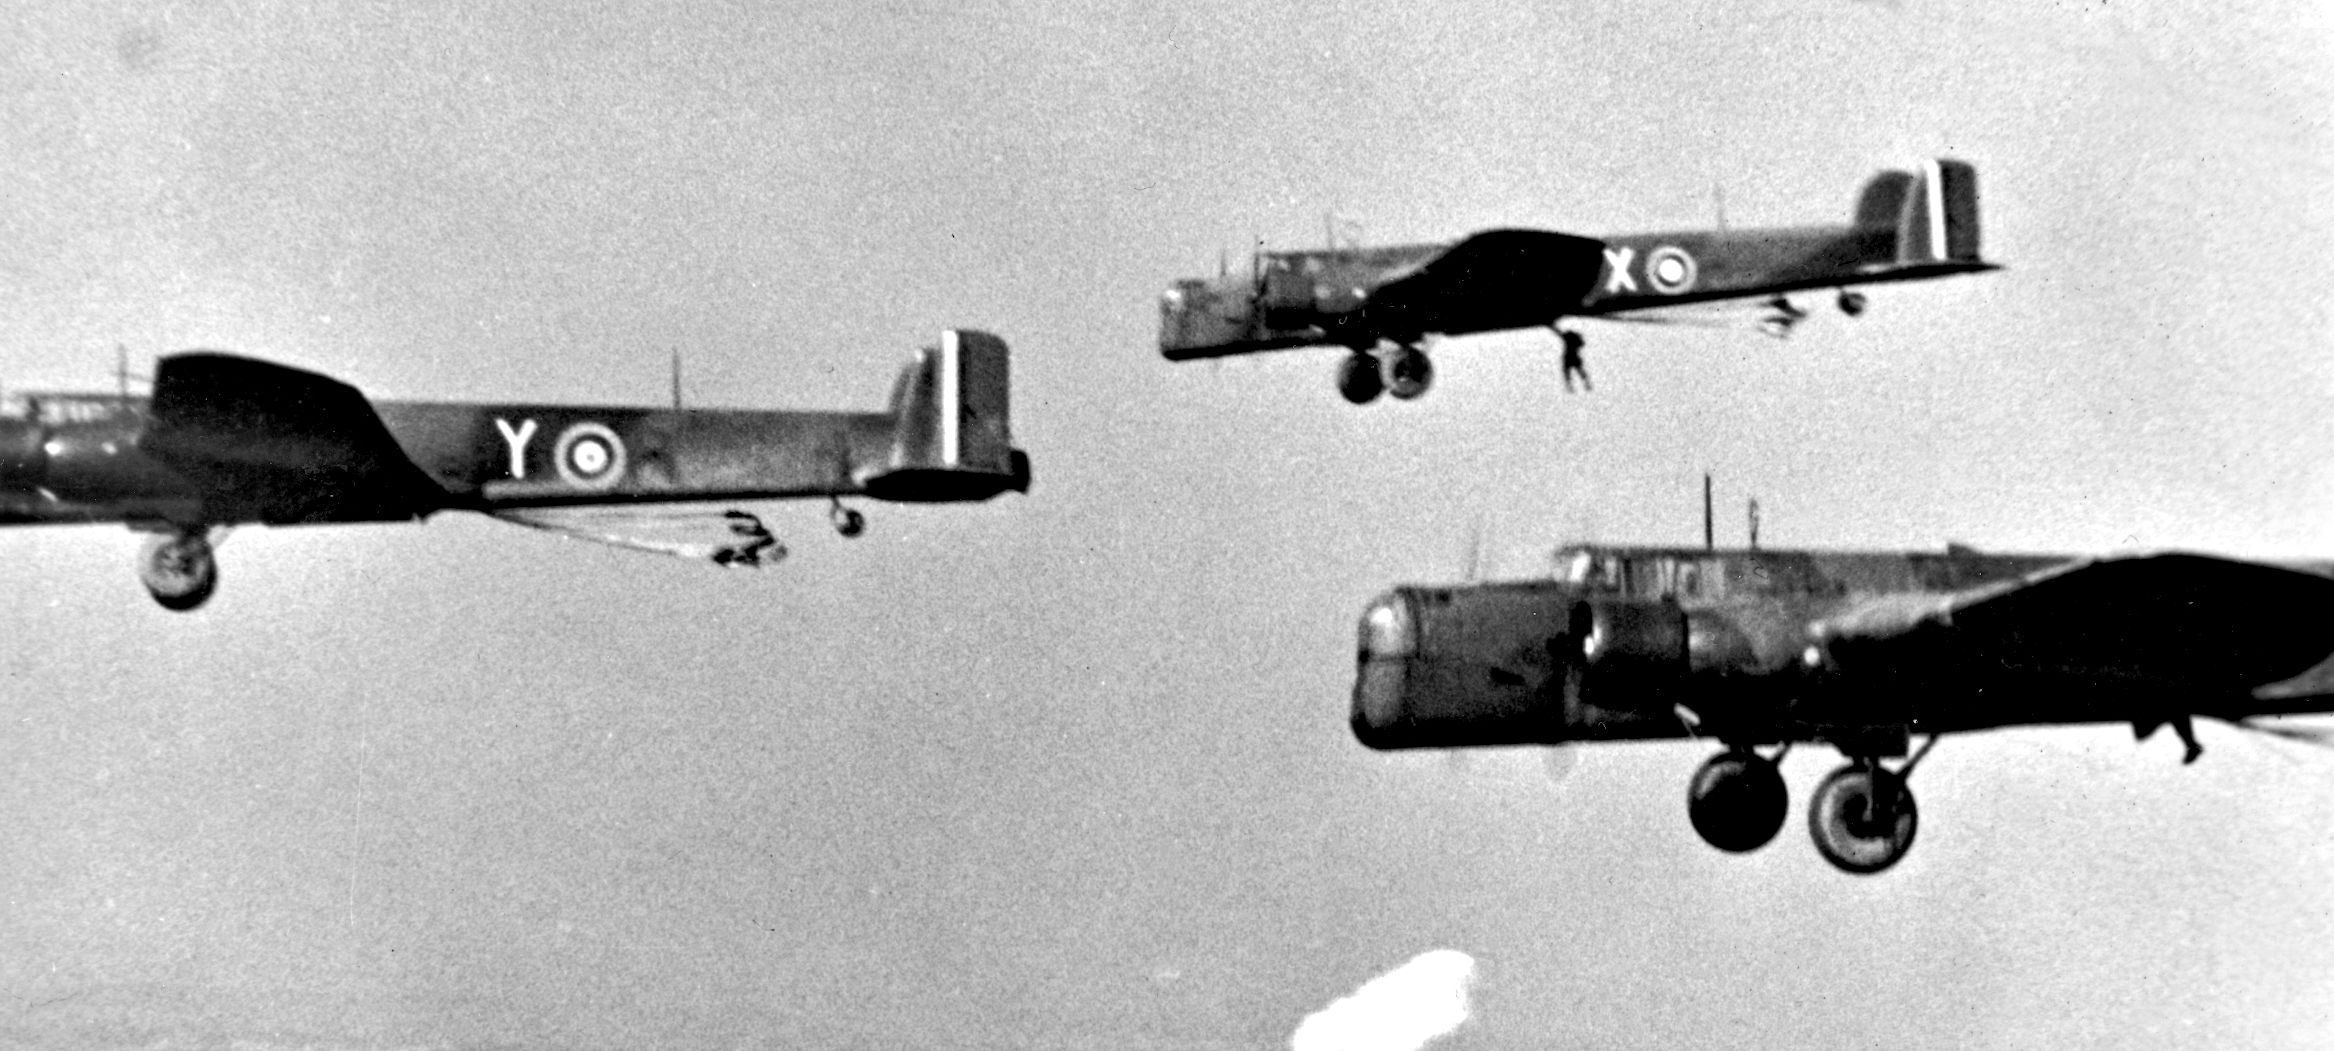 Whitworth Whitley bombers of the Royal Air Force, modified as transport for paras, practice flight operations prior to the Bruneval raid. A para is seen exiting one of the planes in the distance.